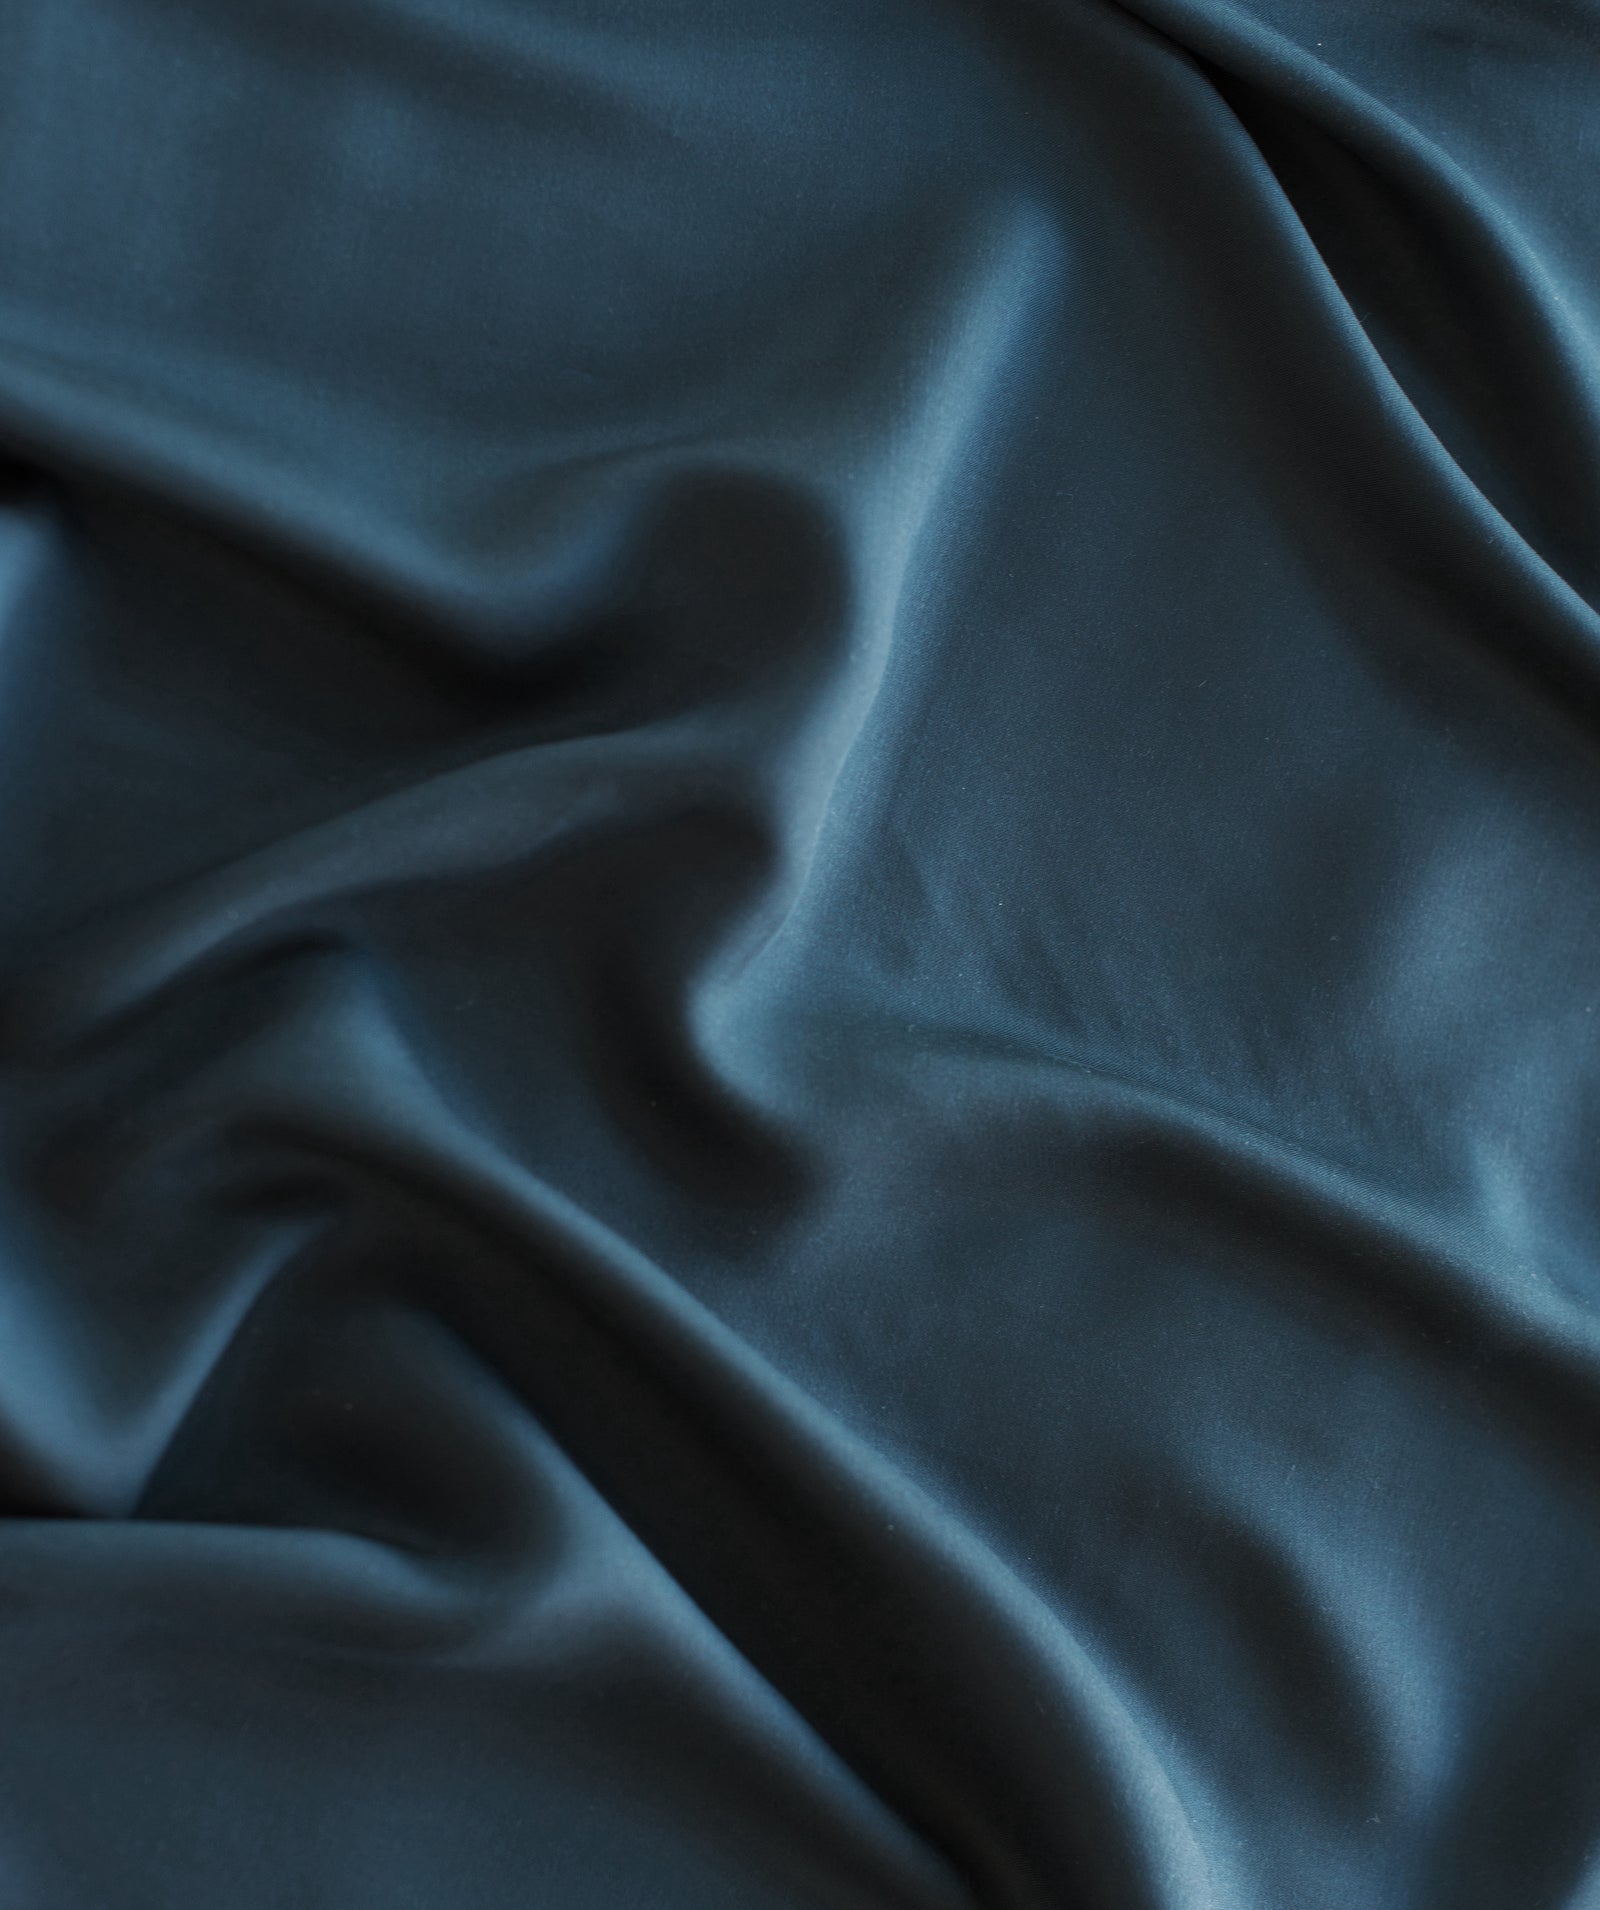 Close up of navy duvet cover fabric 